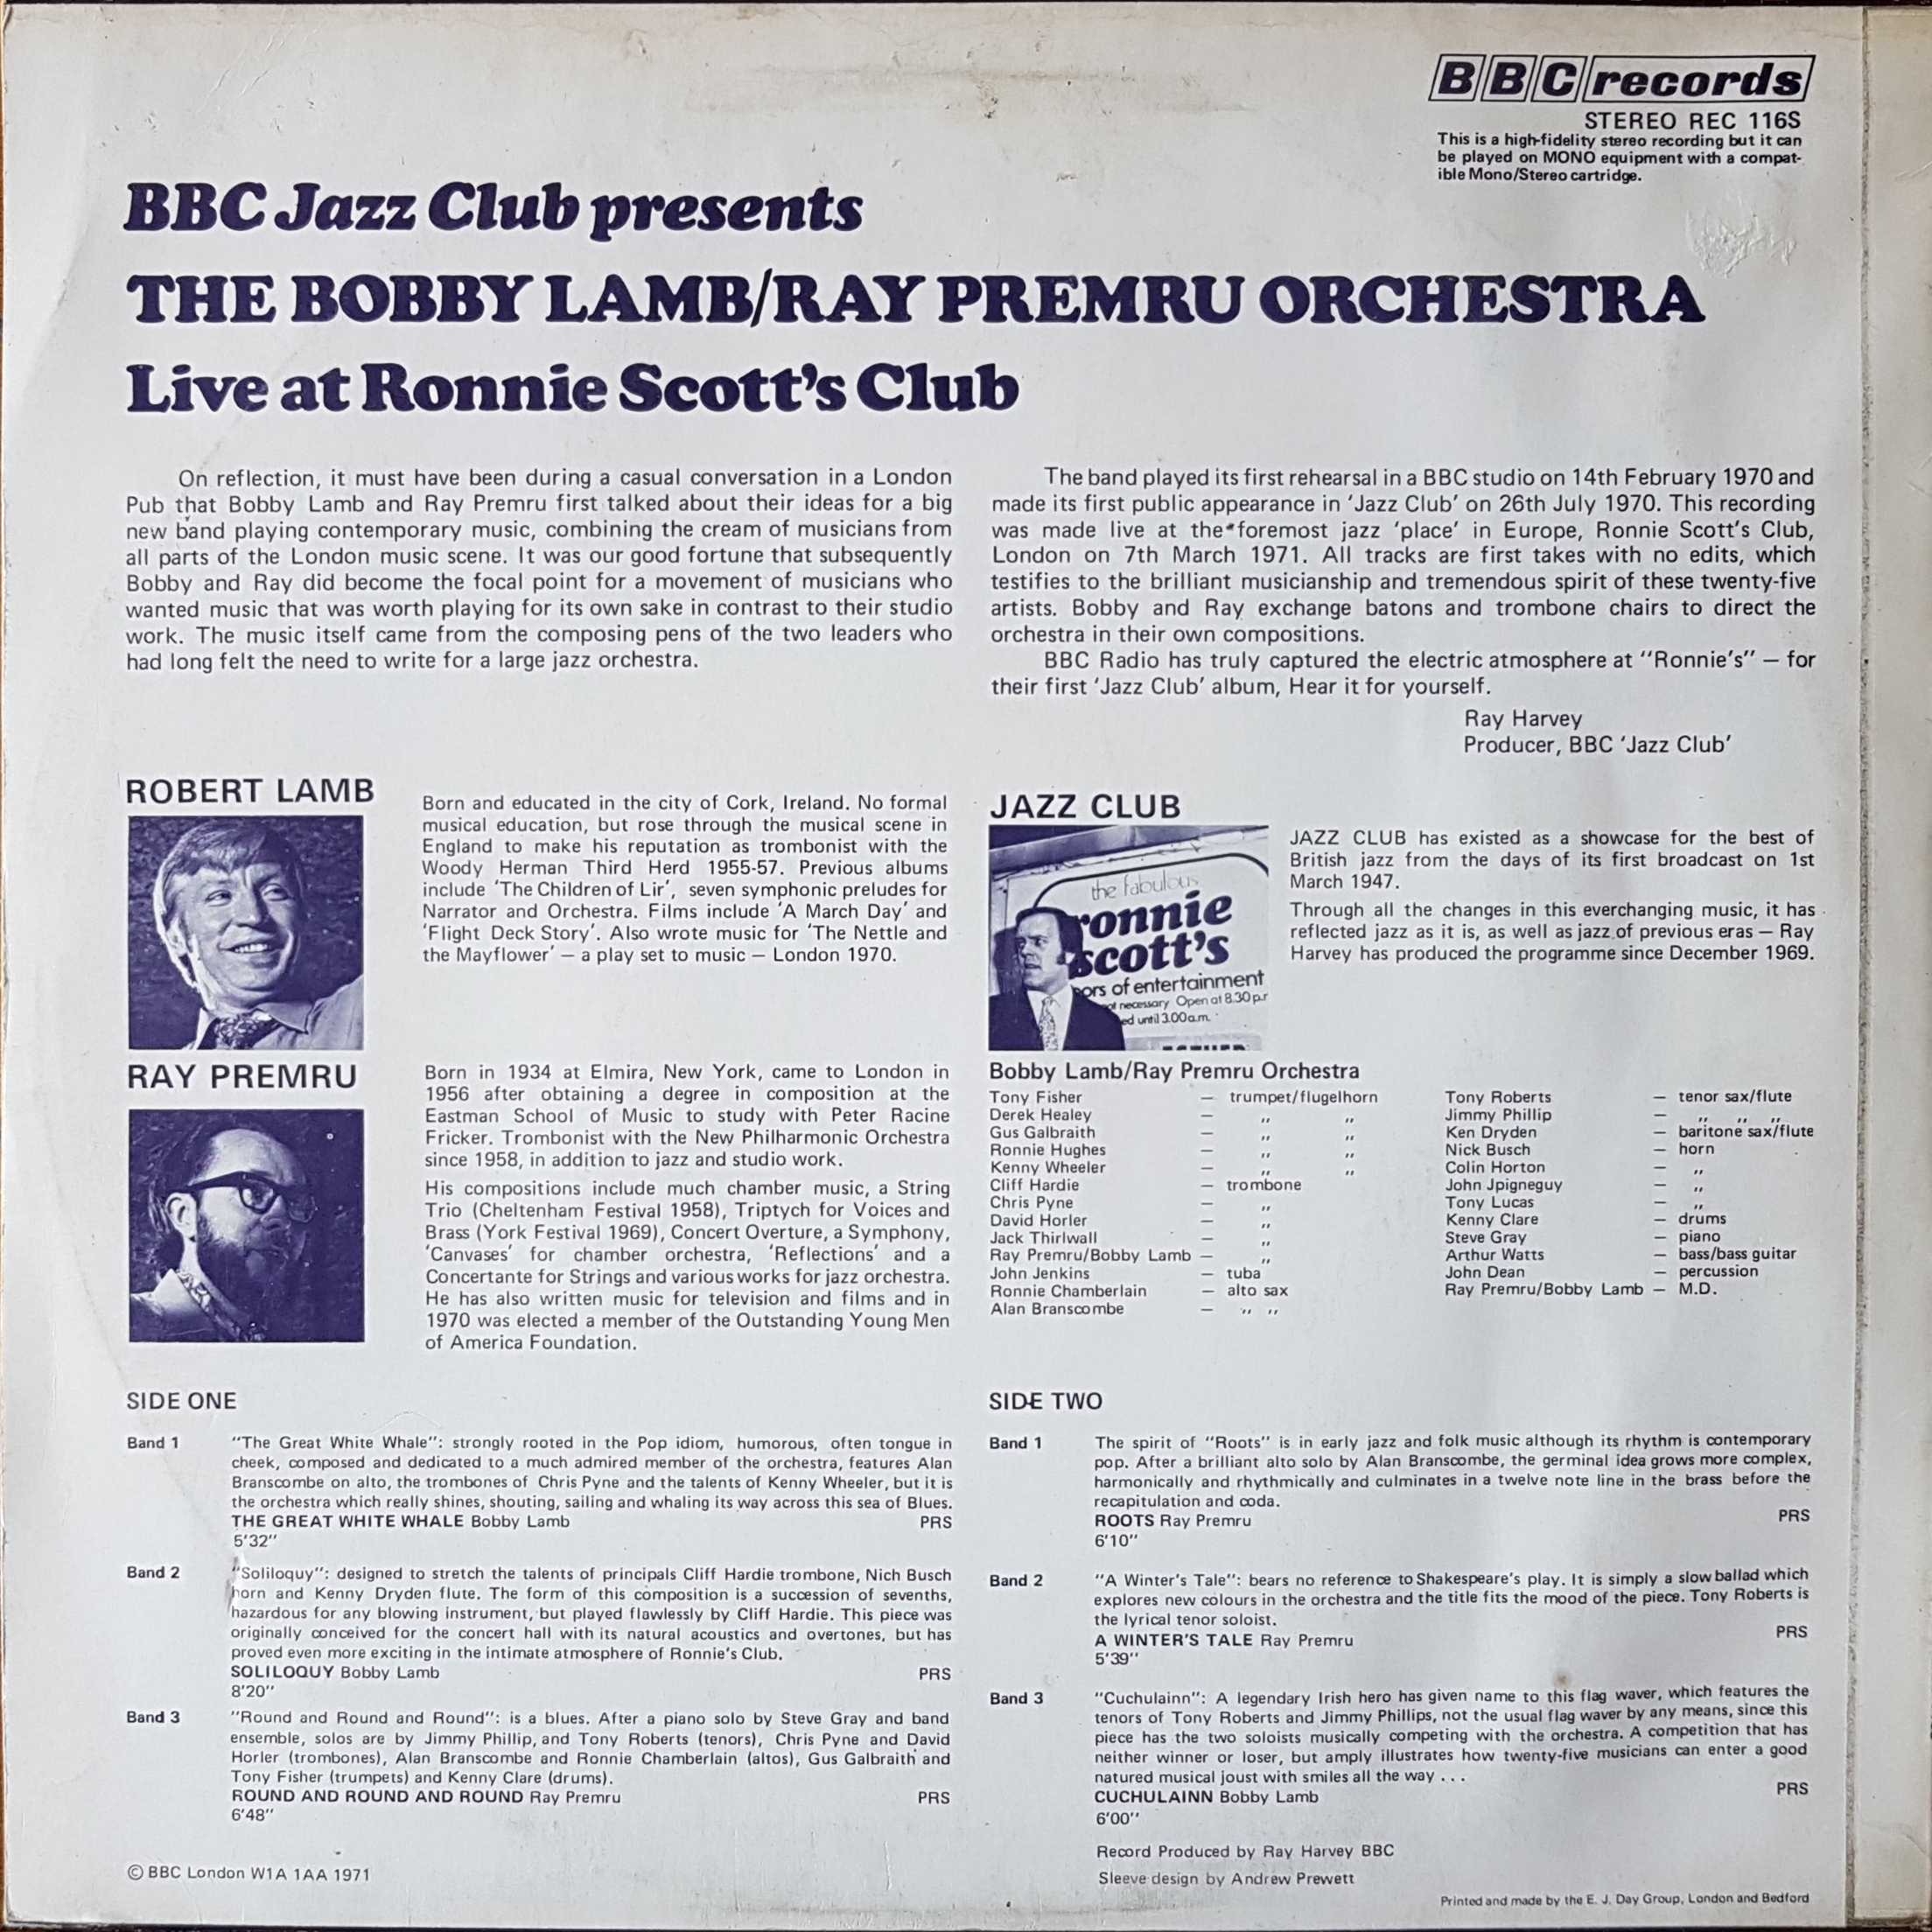 Picture of REC 116 BBC jazz club by artist Various from the BBC records and Tapes library